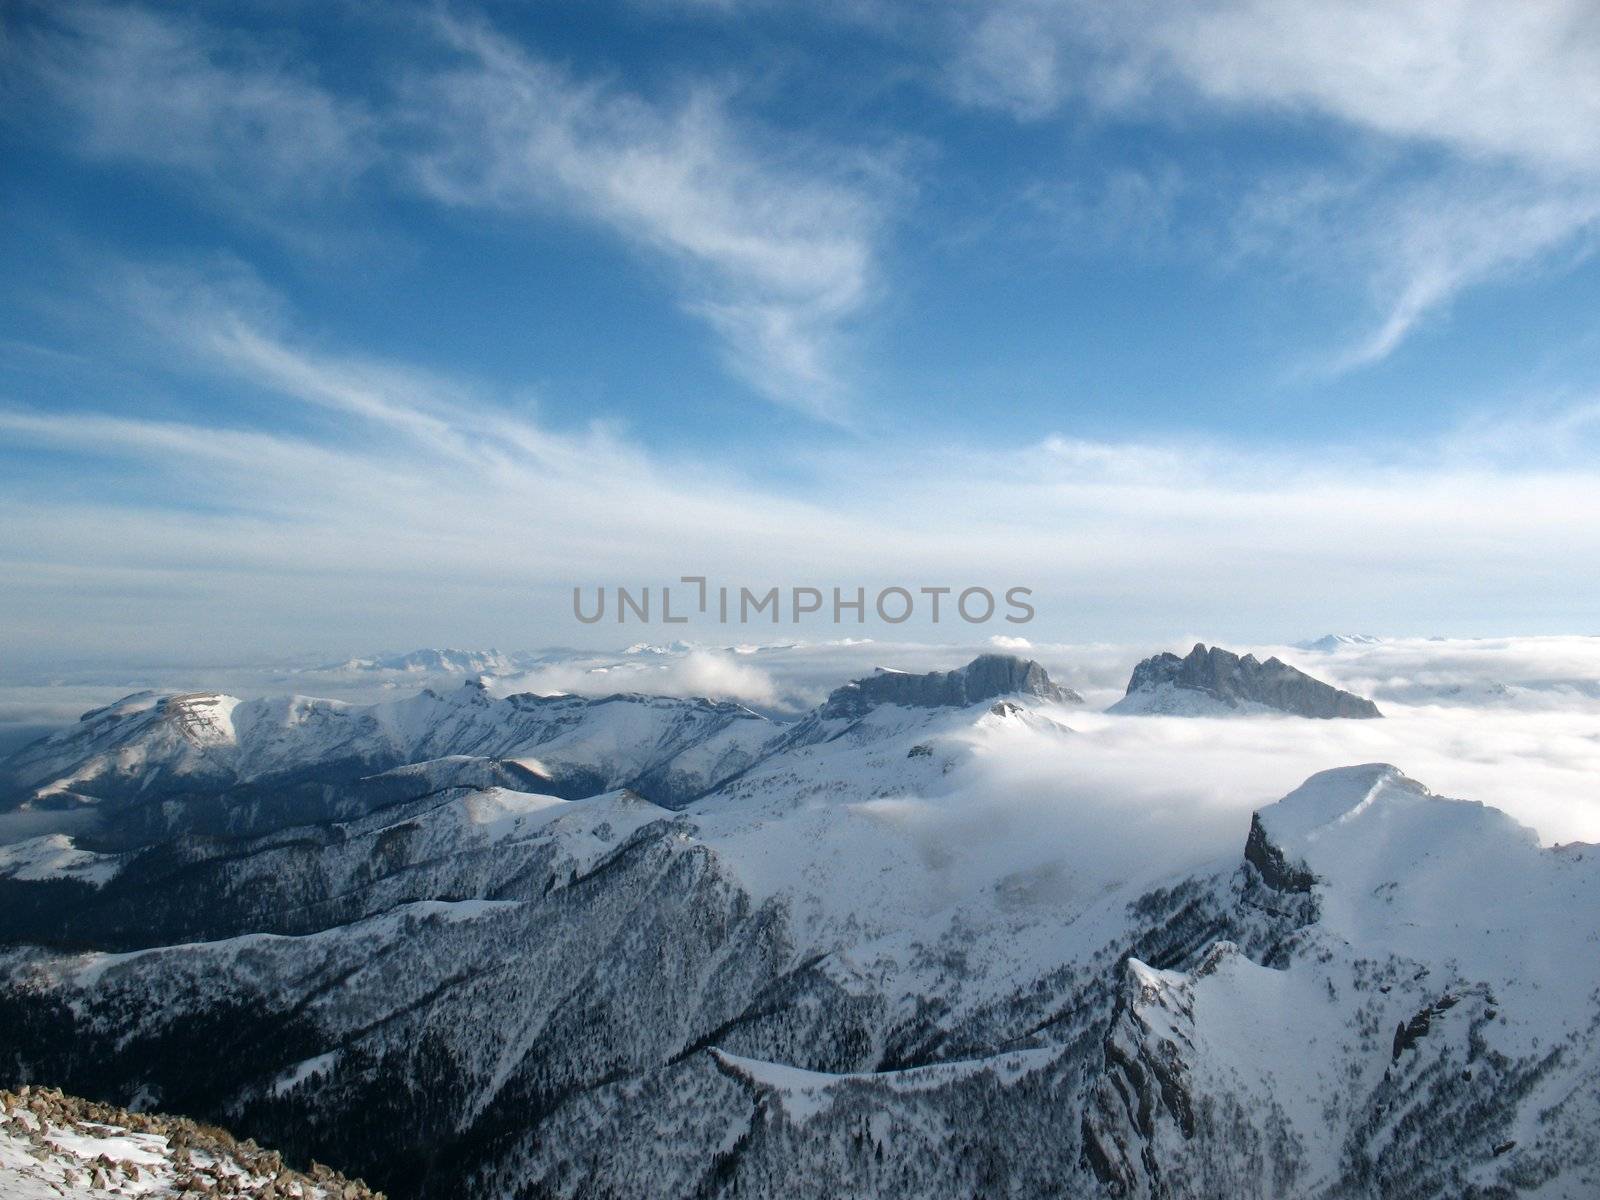 mountains; the glacier; the snow; the top; the mist; the cloud; the blue sky; type; the landscape; background; dawning; nature;  beauty; landscape, panorama, journey, spine, game reserve